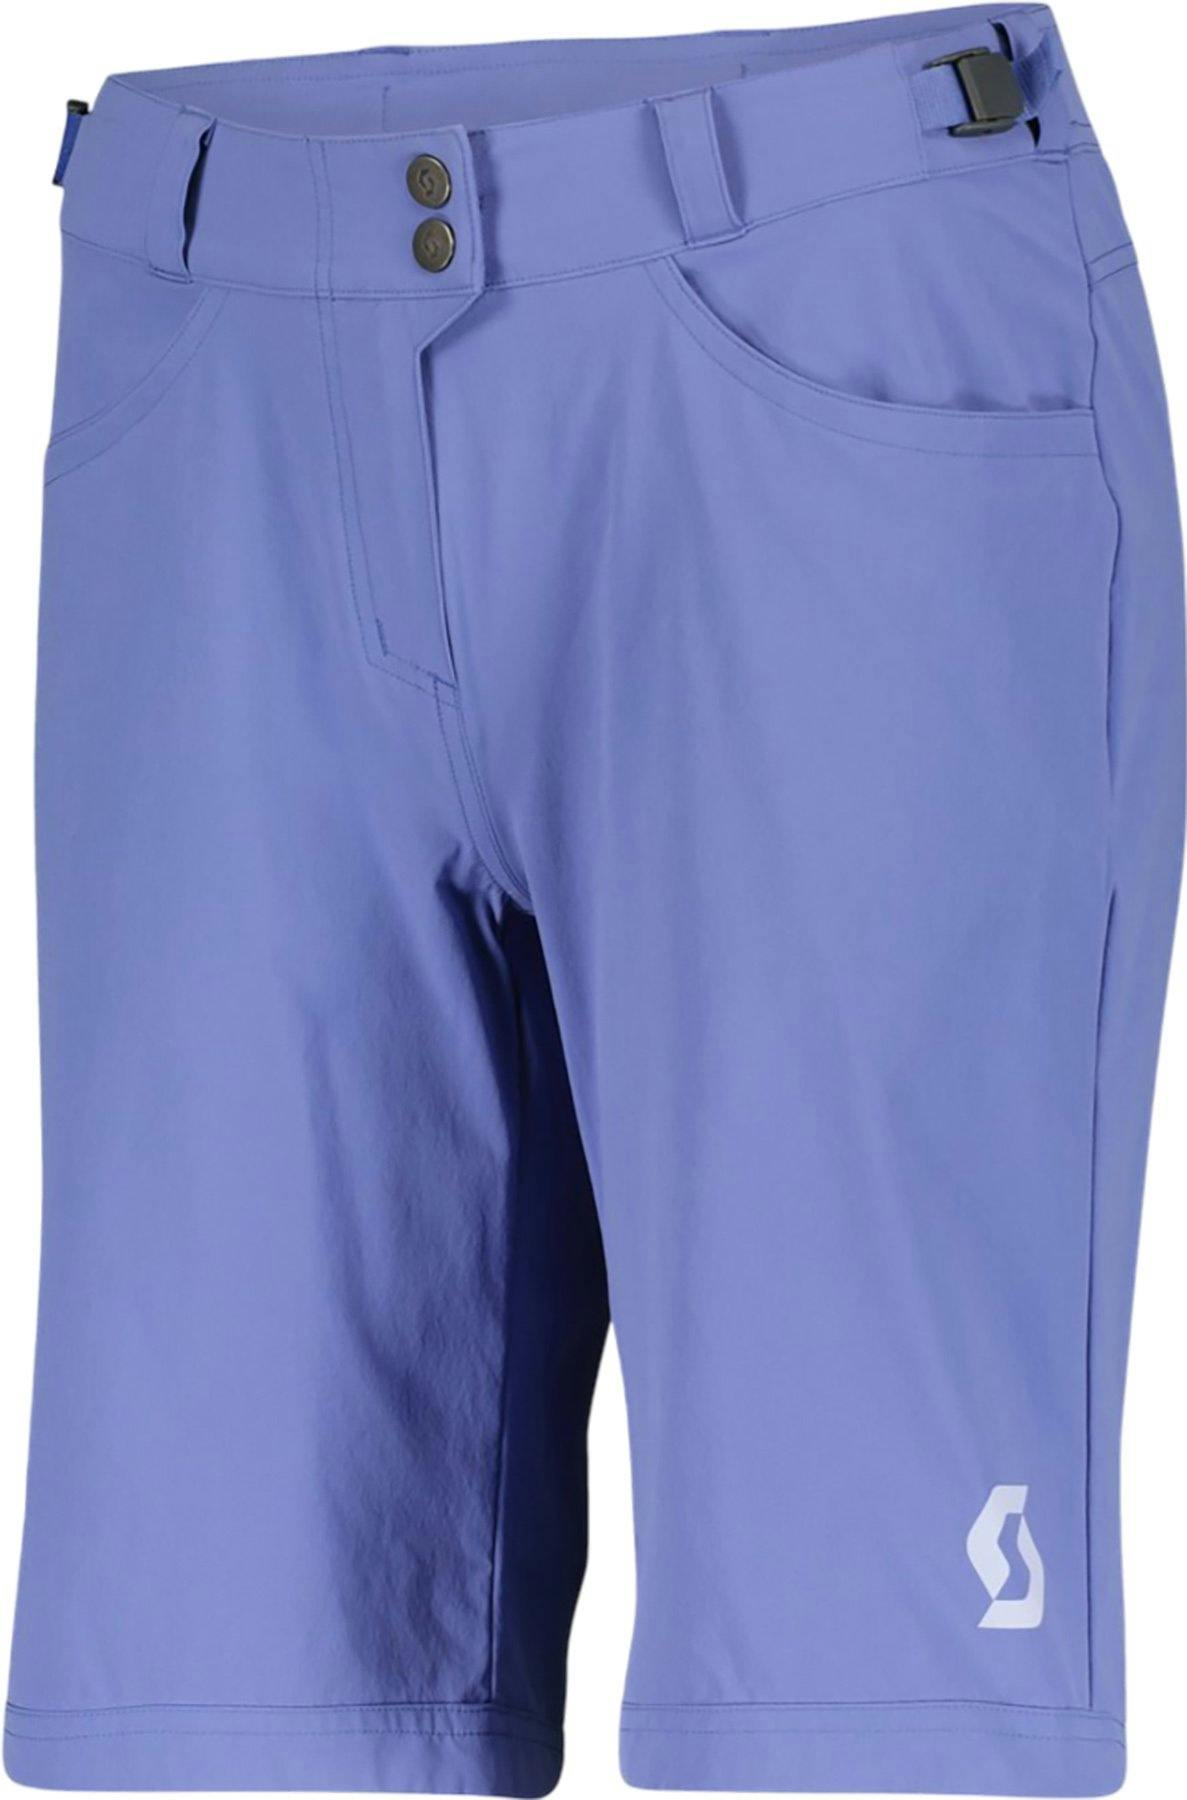 Product image for Trail Flow w/pad Shorts - Women's